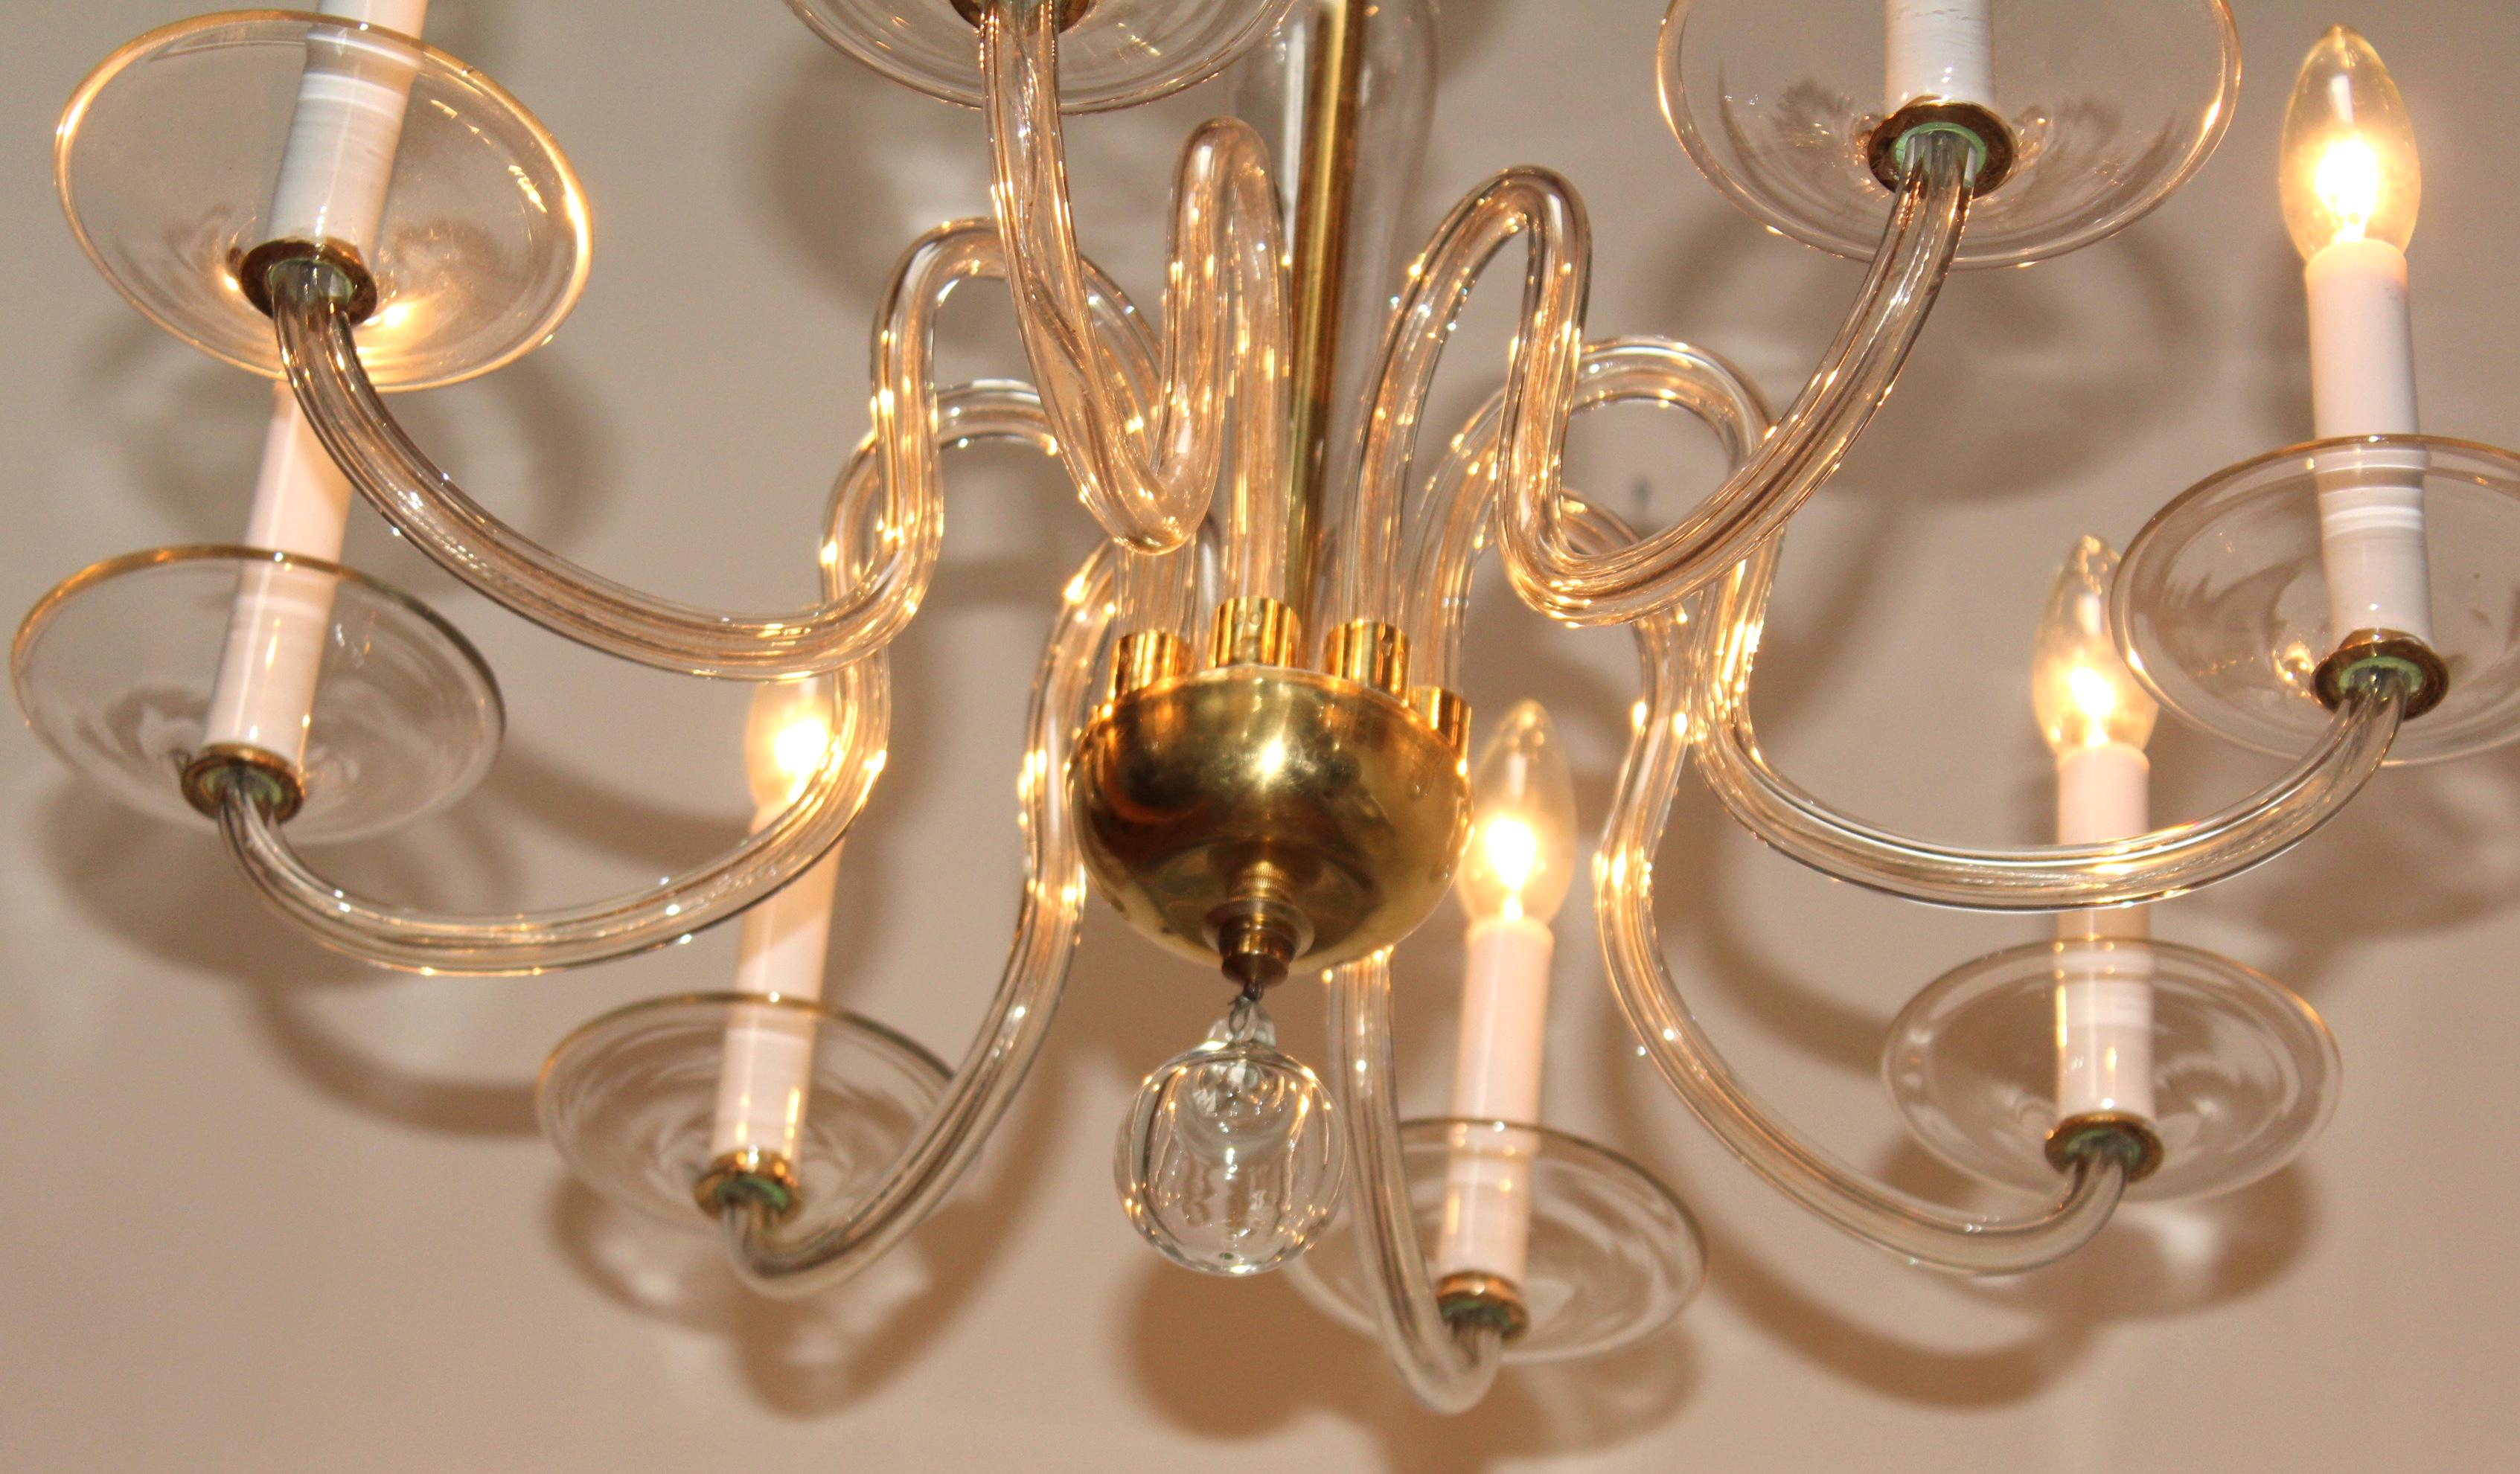 1940's Italian Murano Glass And Brass Chandelier For Sale 8